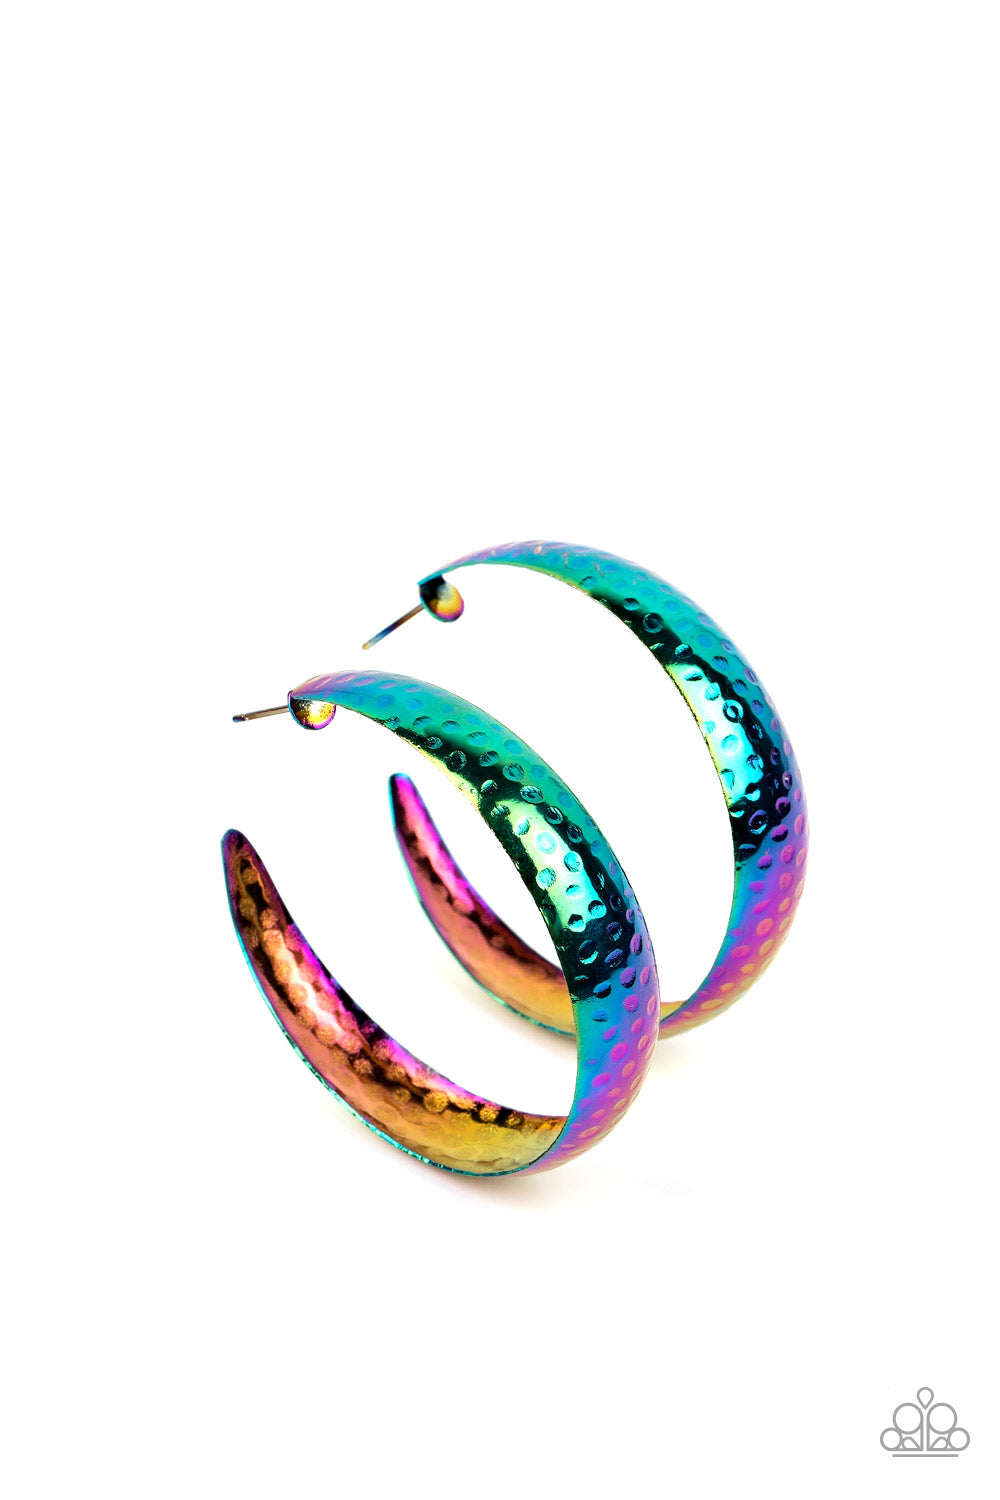 Paparazzi Futuristic Flavor - Multi Earrings - September 2022 Life of the Party-Paparazzi Jewelry Images